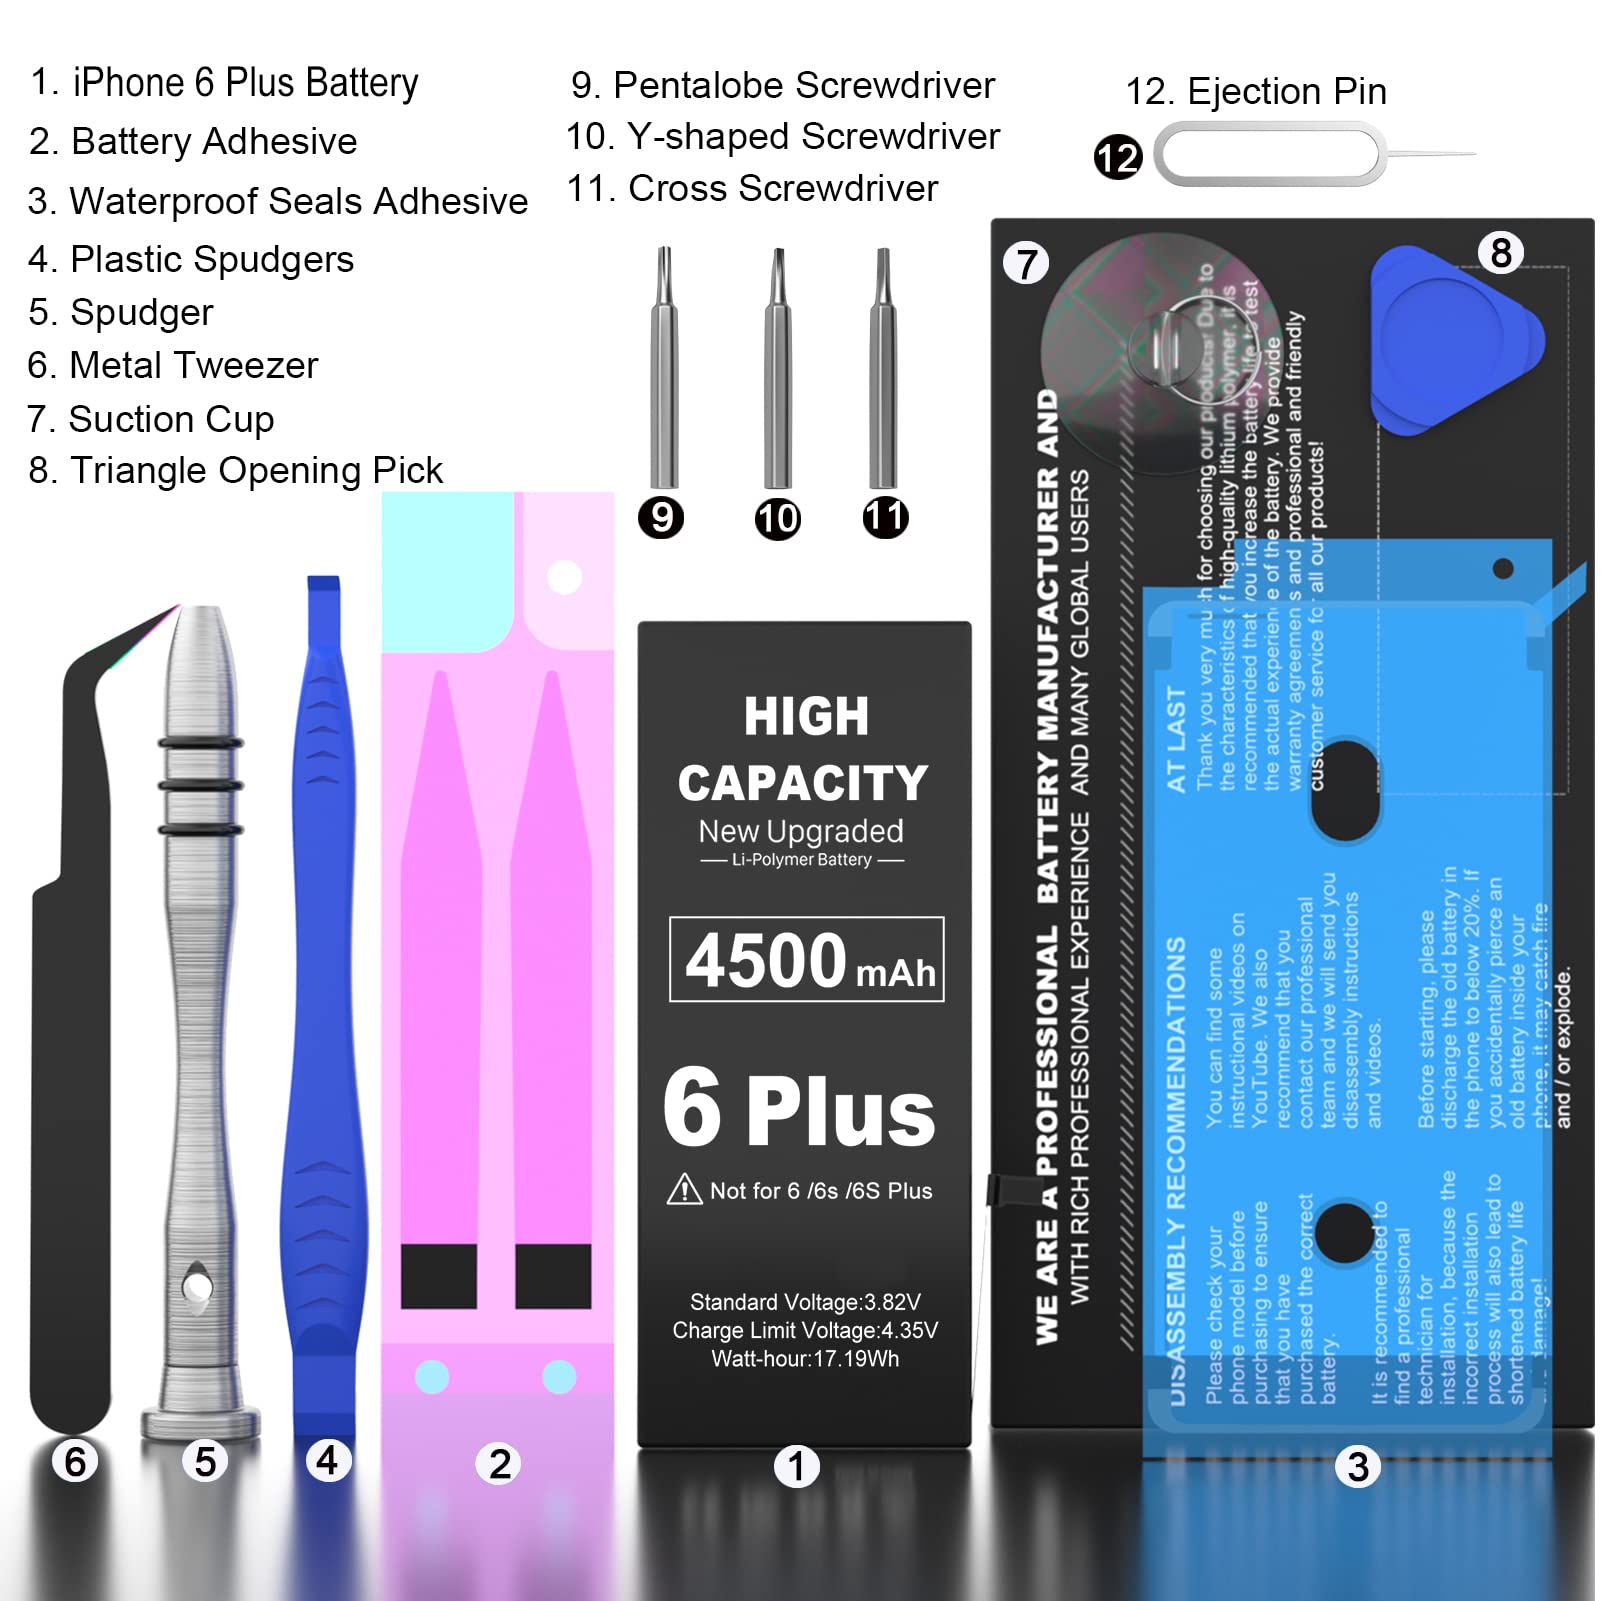 WAVYPO Battery for iPhone 6 Plus, Upgraded 4500mAh High Capacity New 0 Cycle Battery Replacement for iPhone 6P A1522 A1524 A1593 with Full Repair Tools and Adhesive Strips Kit